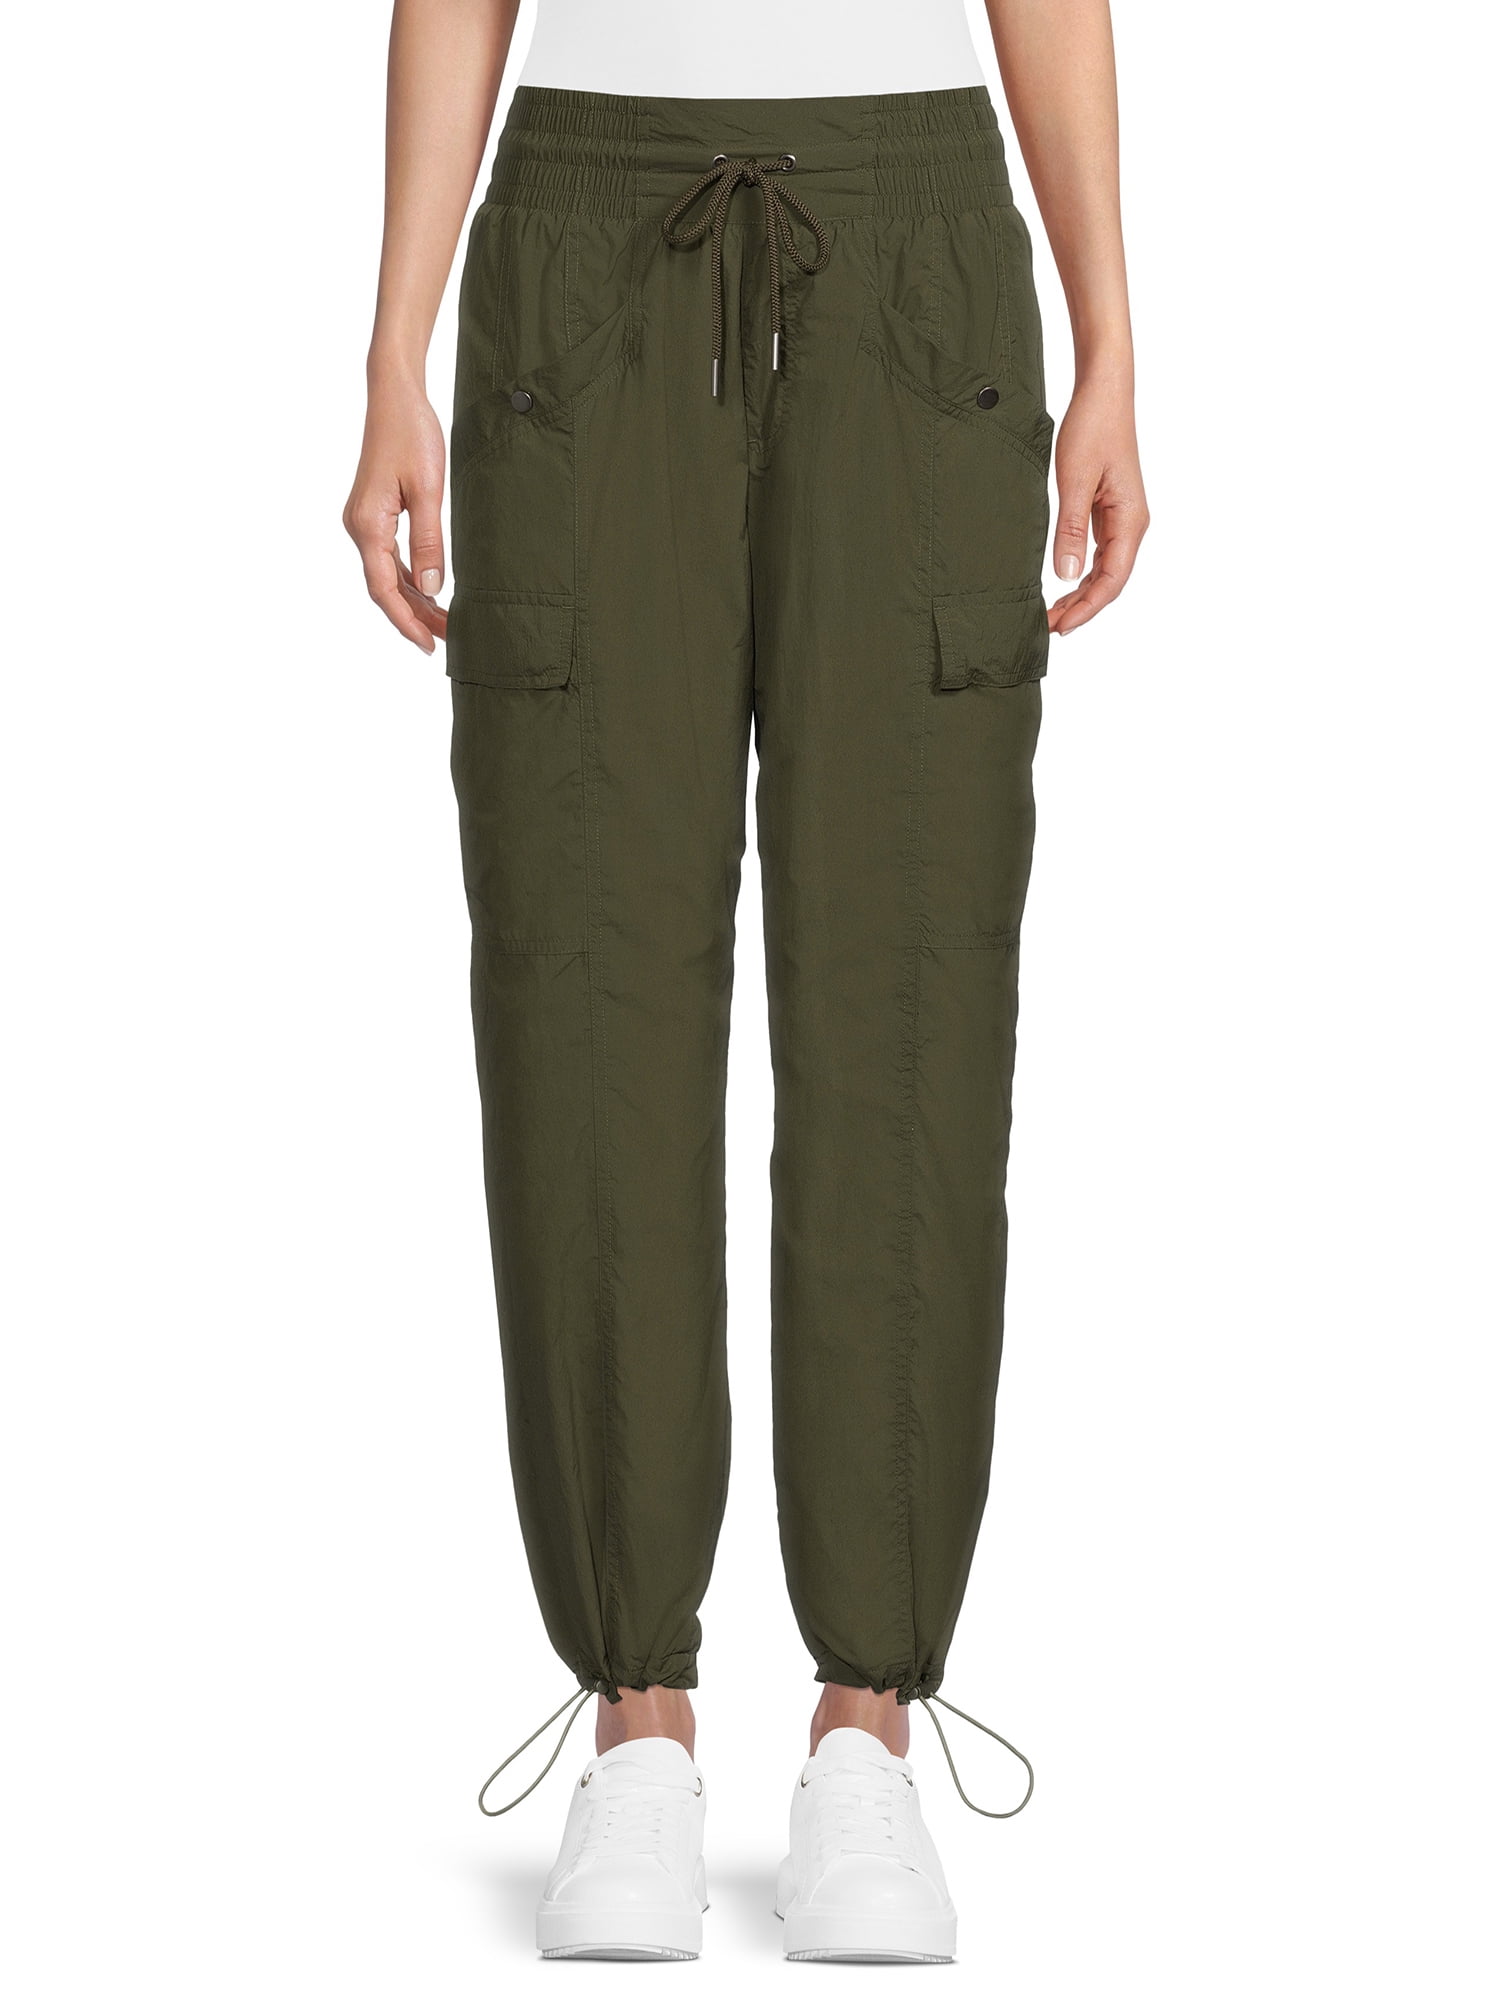 Avia Women's Utility Pant with Side Cargo Pockets 